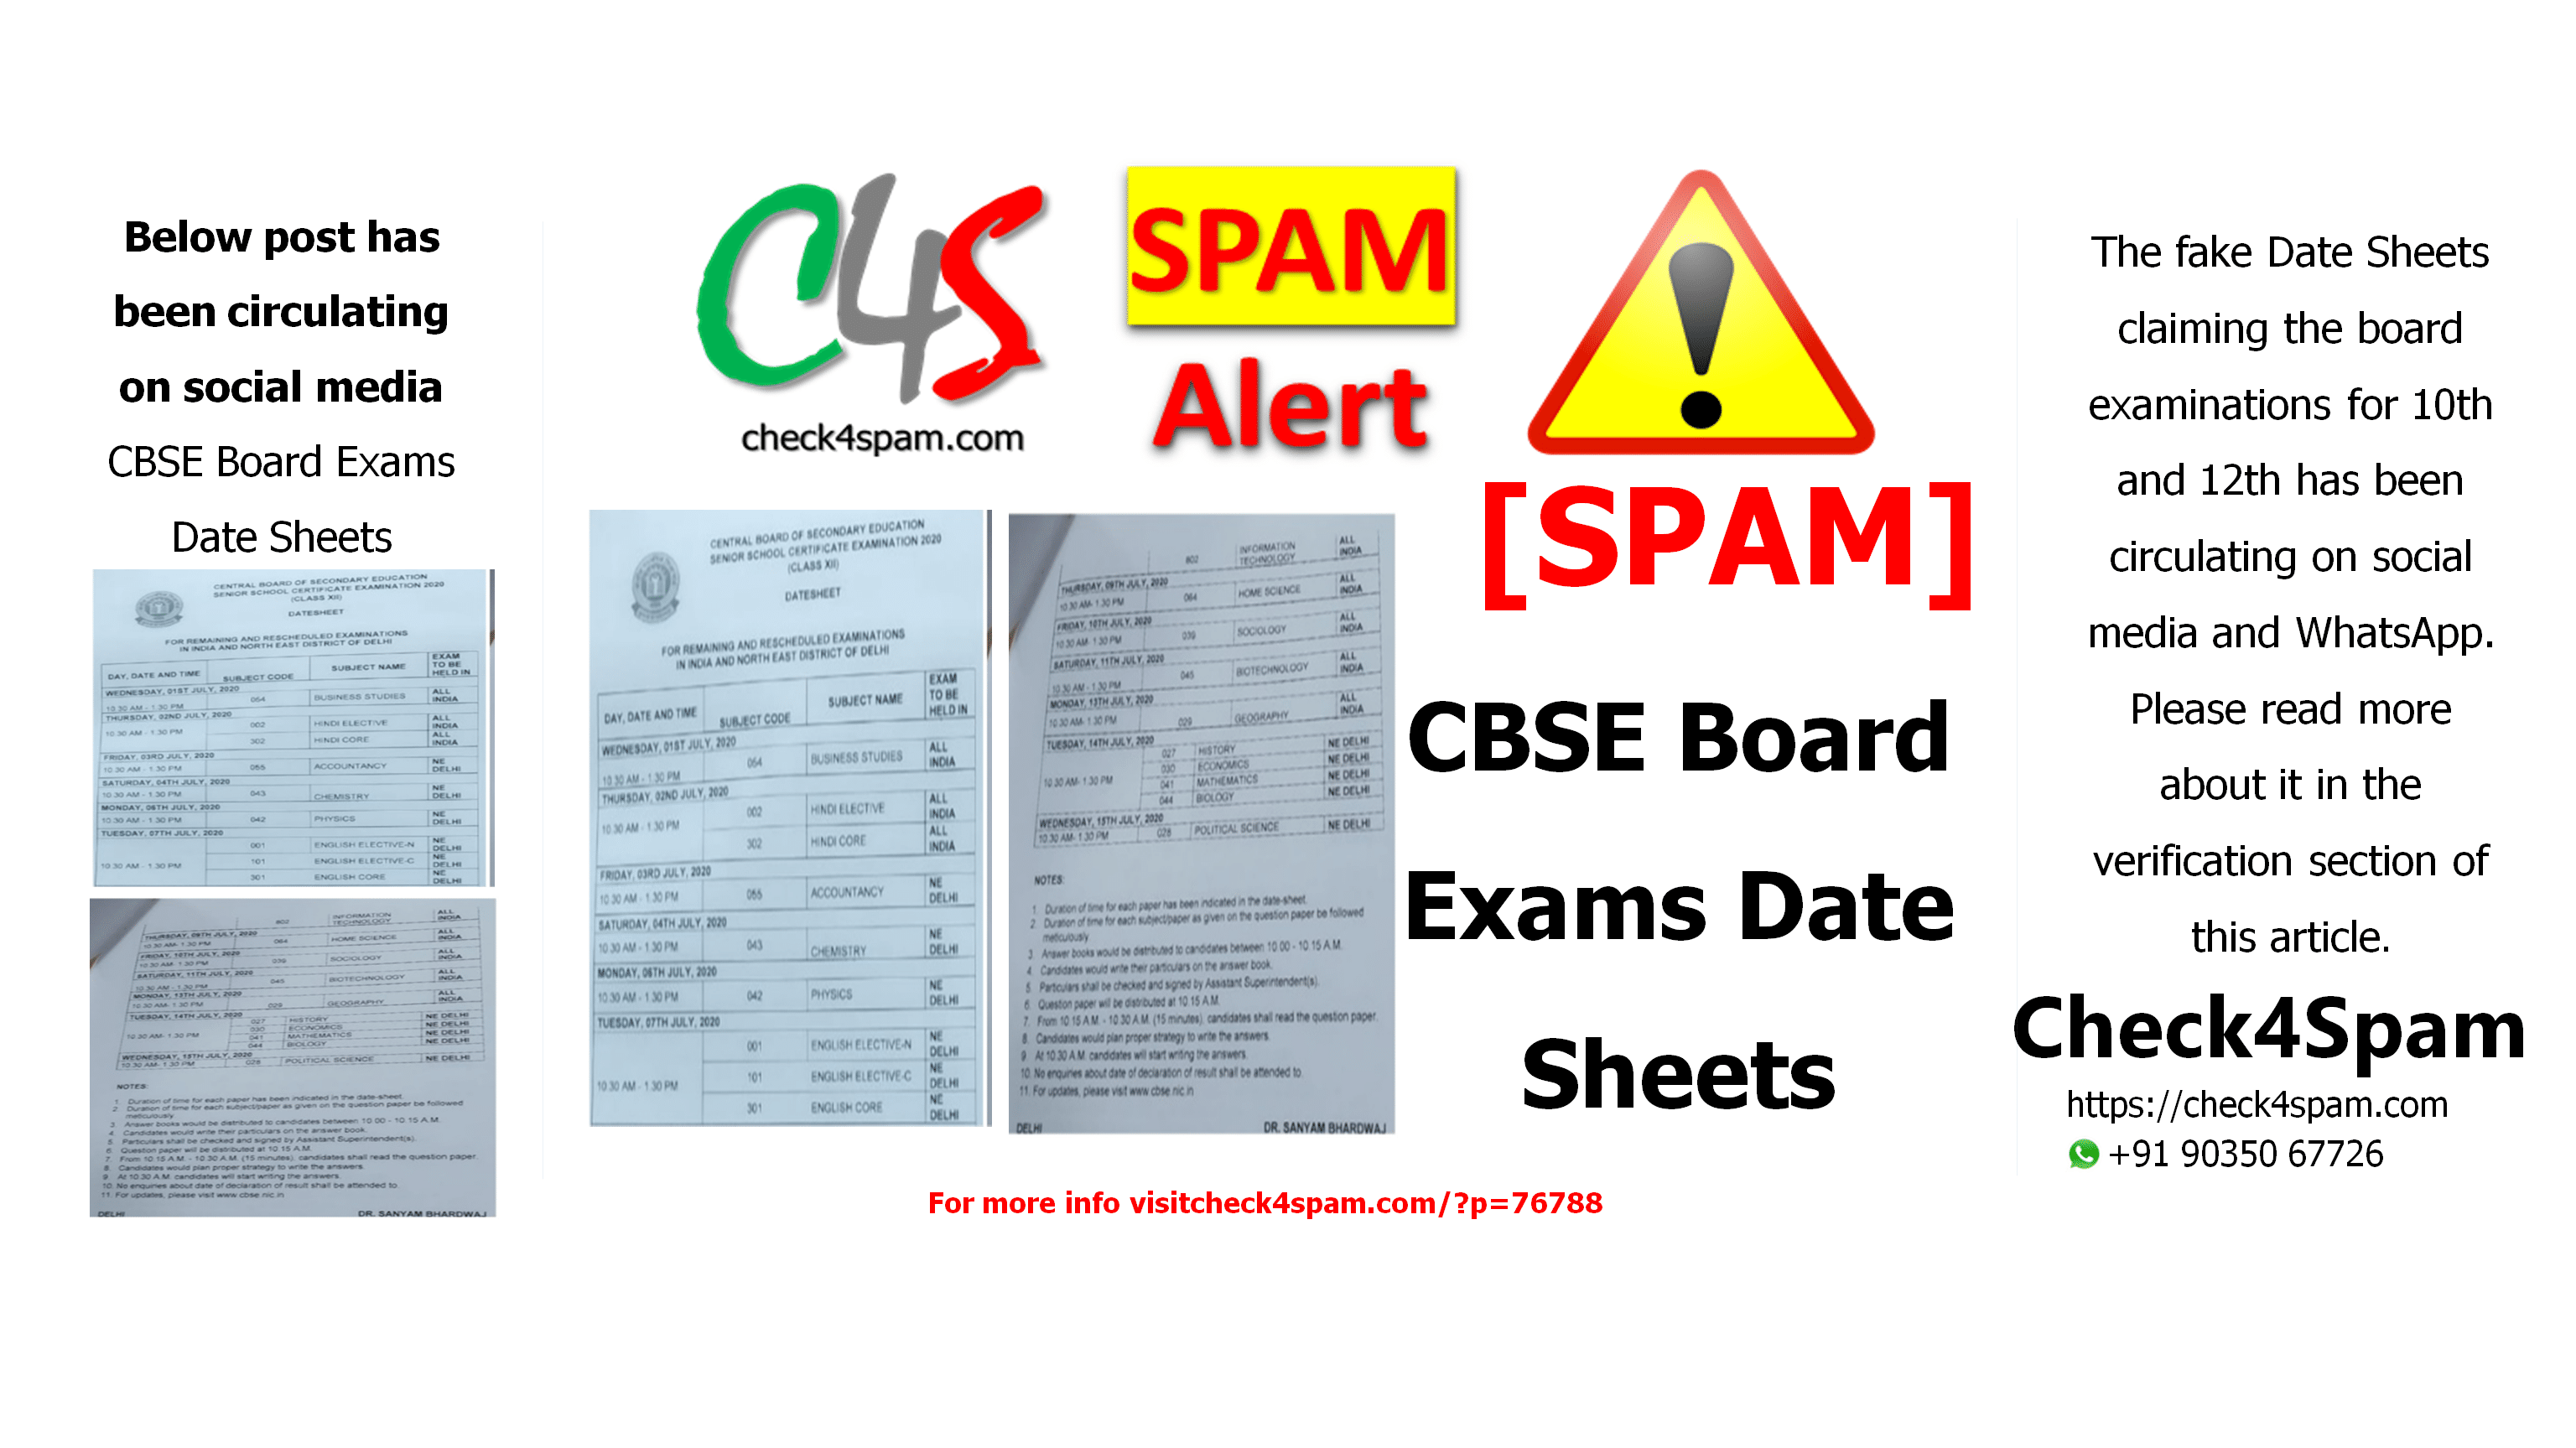 CBSE Board Exams Date Sheets